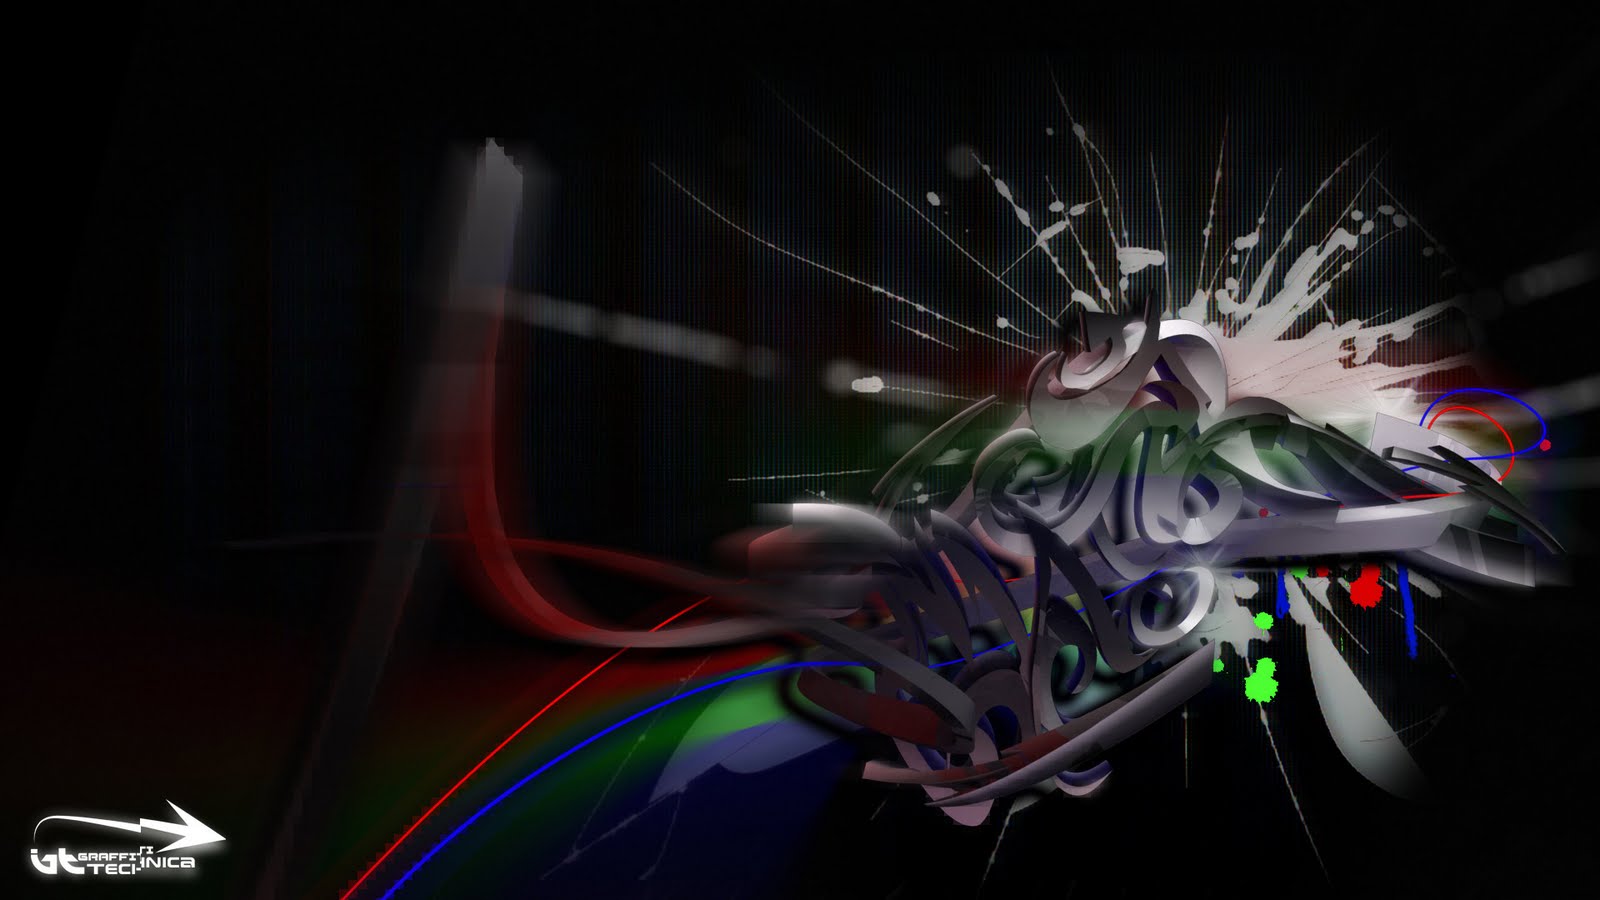 Design Using Graffiti Art You May Use Them As Desktop Background Or